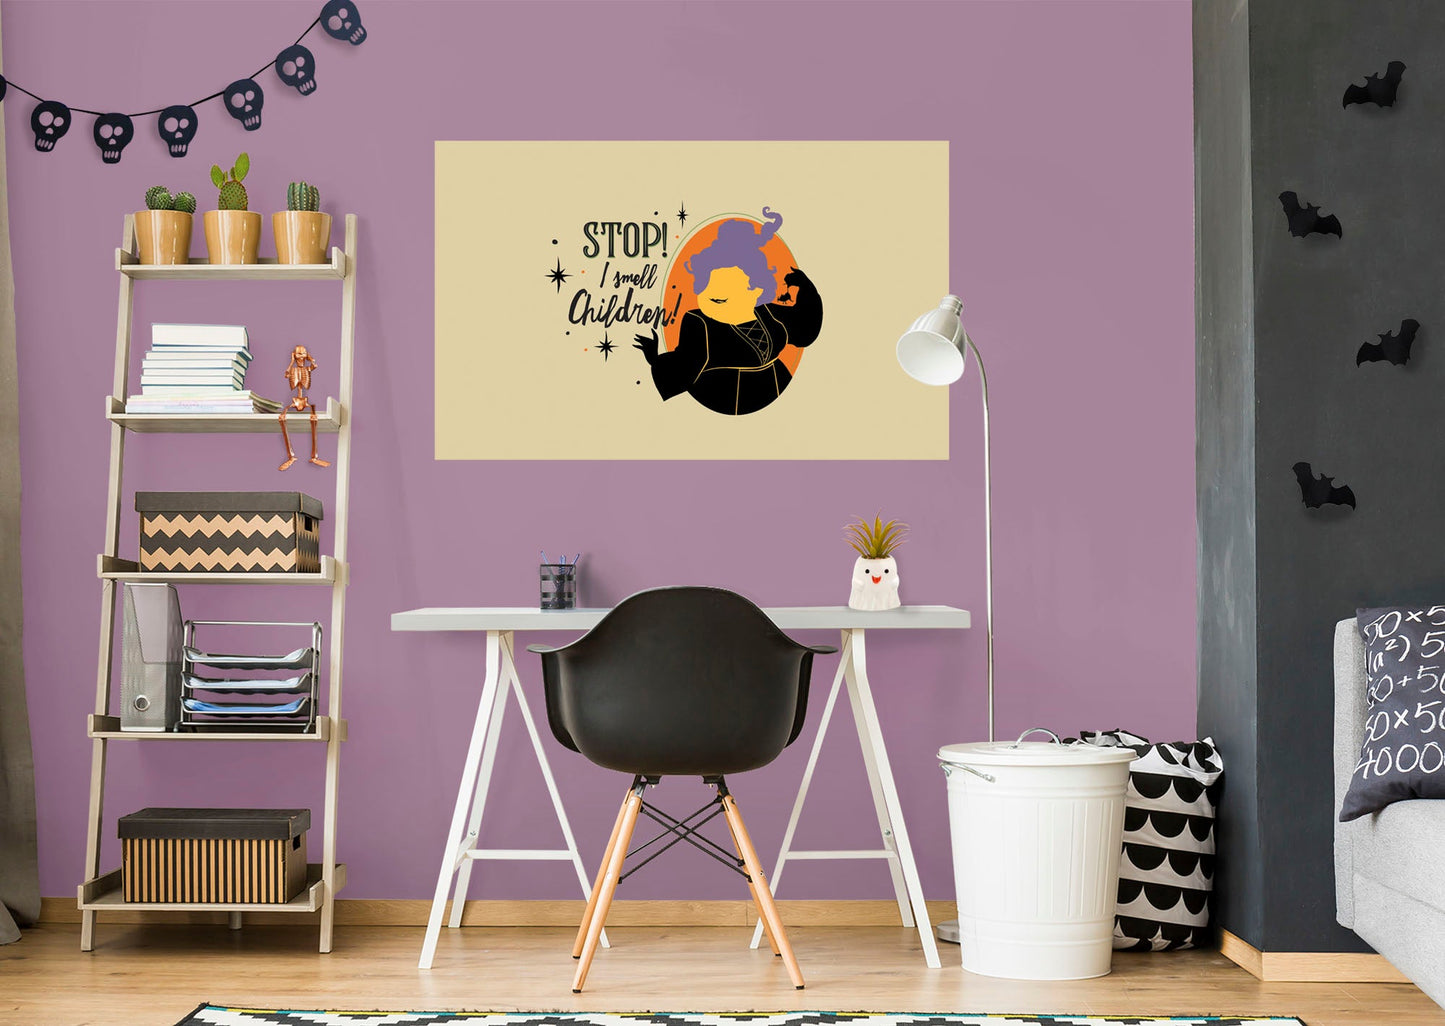 Hocus Pocus:  Stop I Smell Children Mural        - Officially Licensed Disney Removable Wall   Adhesive Decal